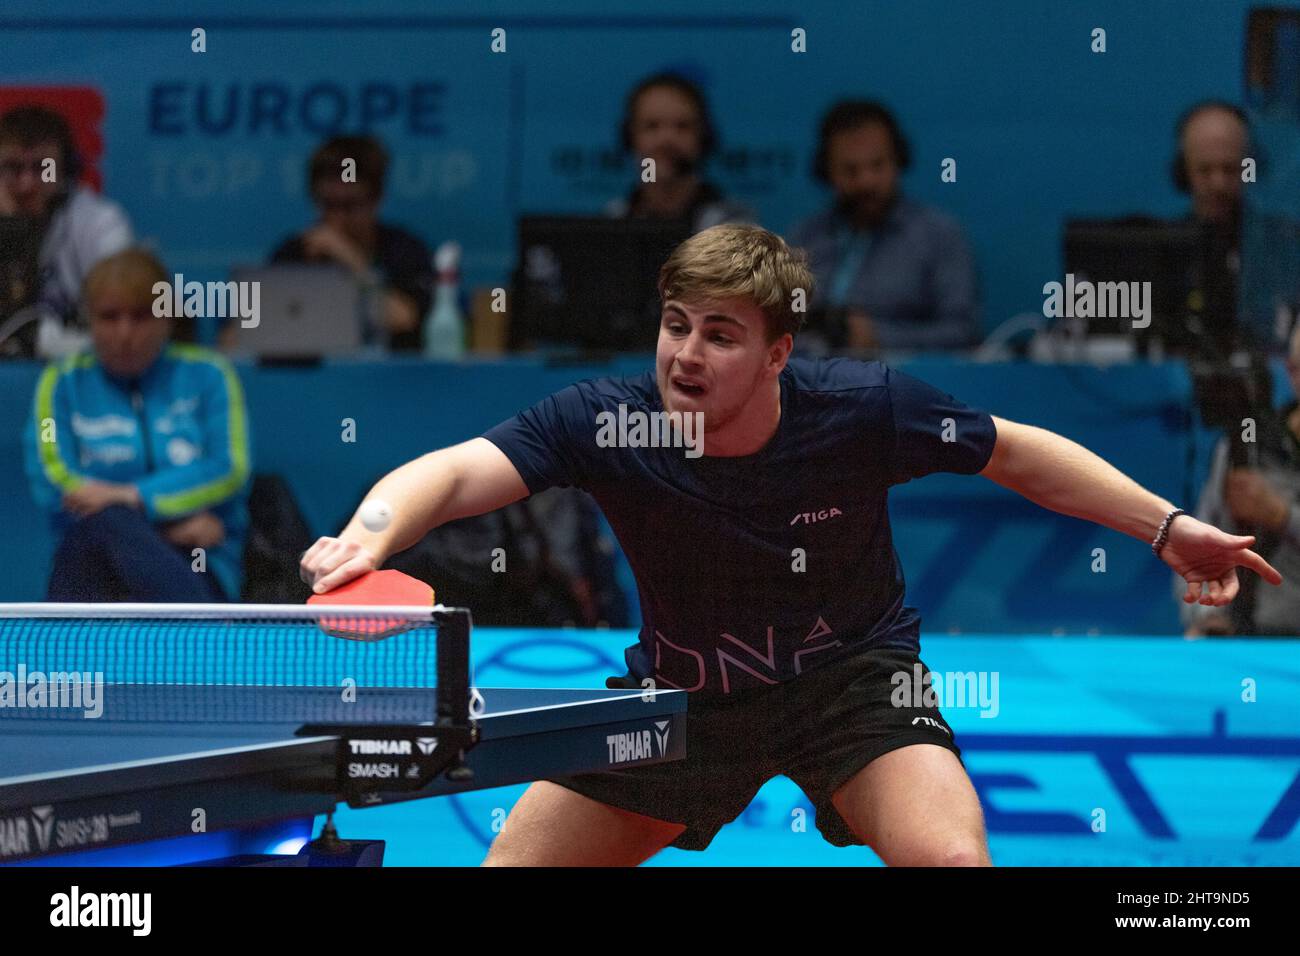 Montreux, Switzerland. 02nd Aug, 2022. Darko Jorgic of Slovenia is in  action during the final of the men's table tennis tournament at the CCB  Europe Top 16 Montreux 2022 (Photo by Eric